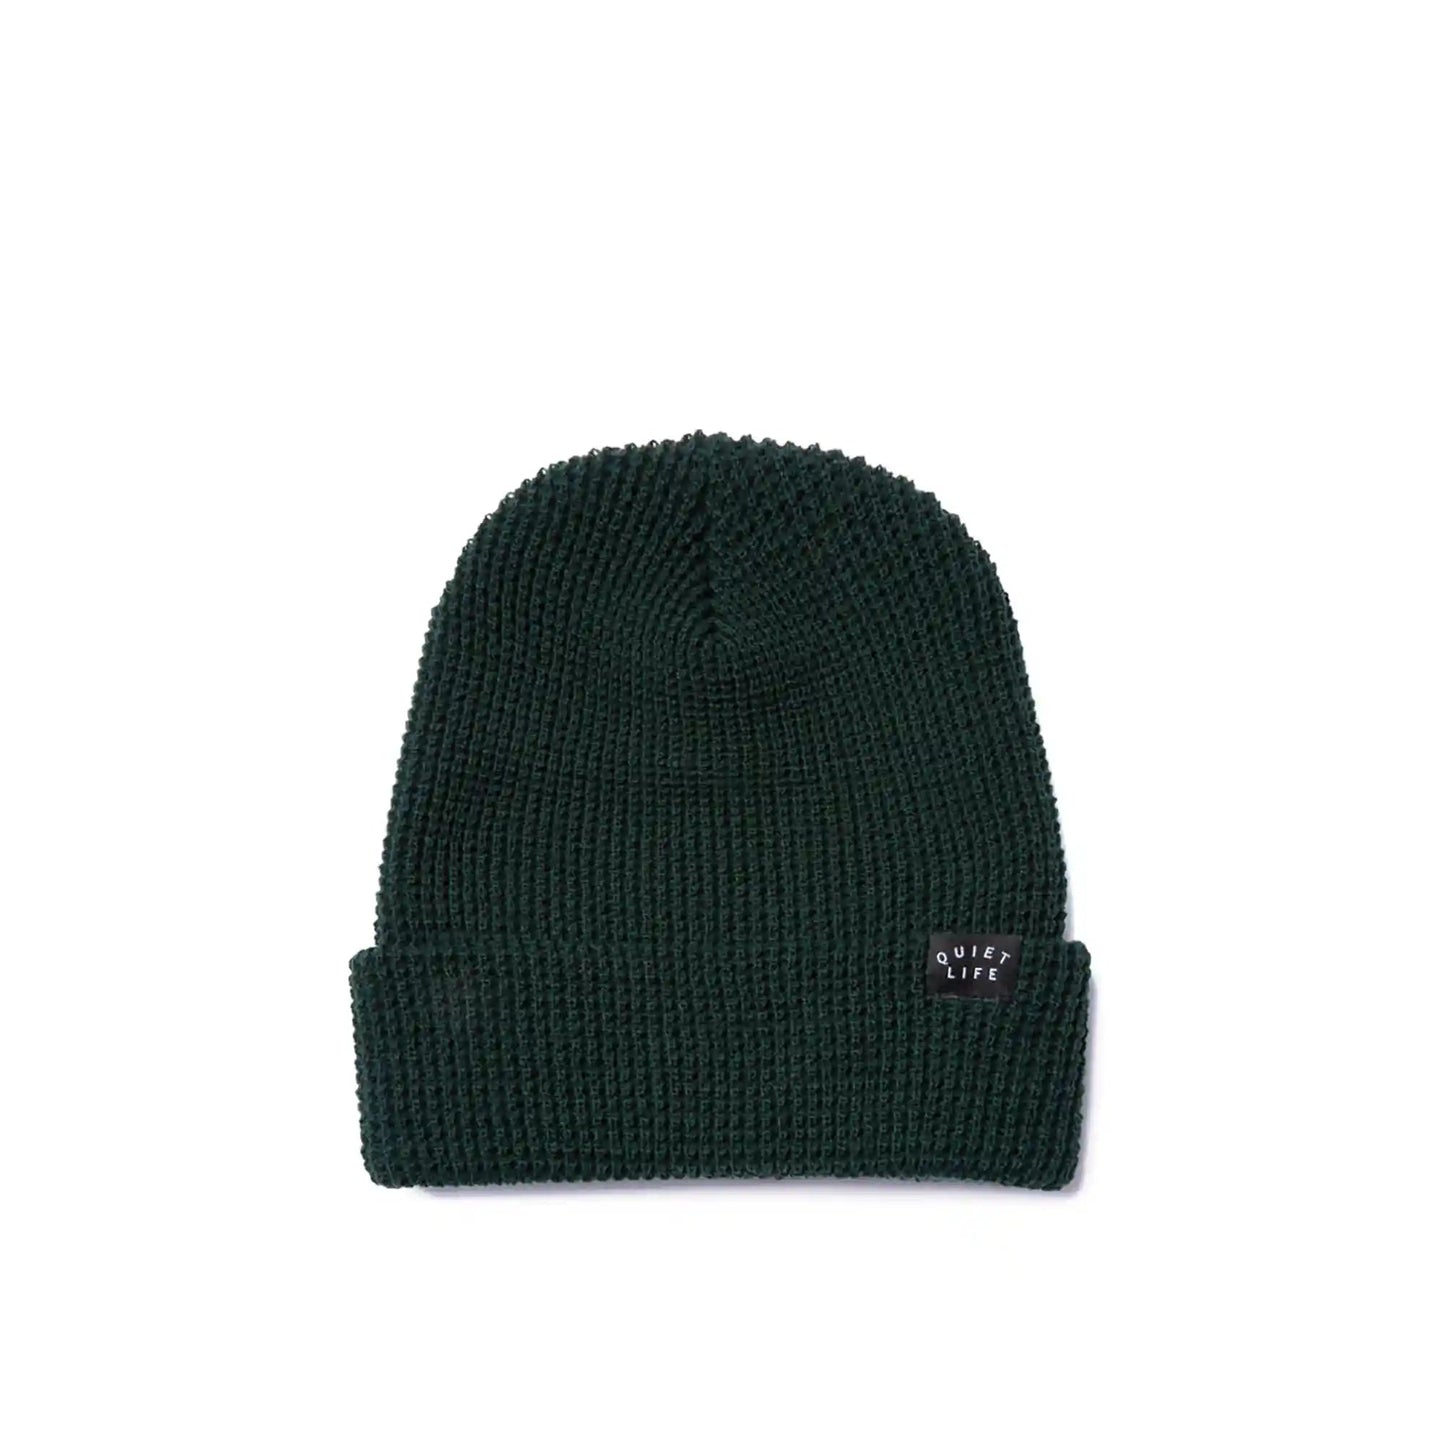 The Quiet Life Waffle Beanie, forest - Tiki Room Skateboards - 1